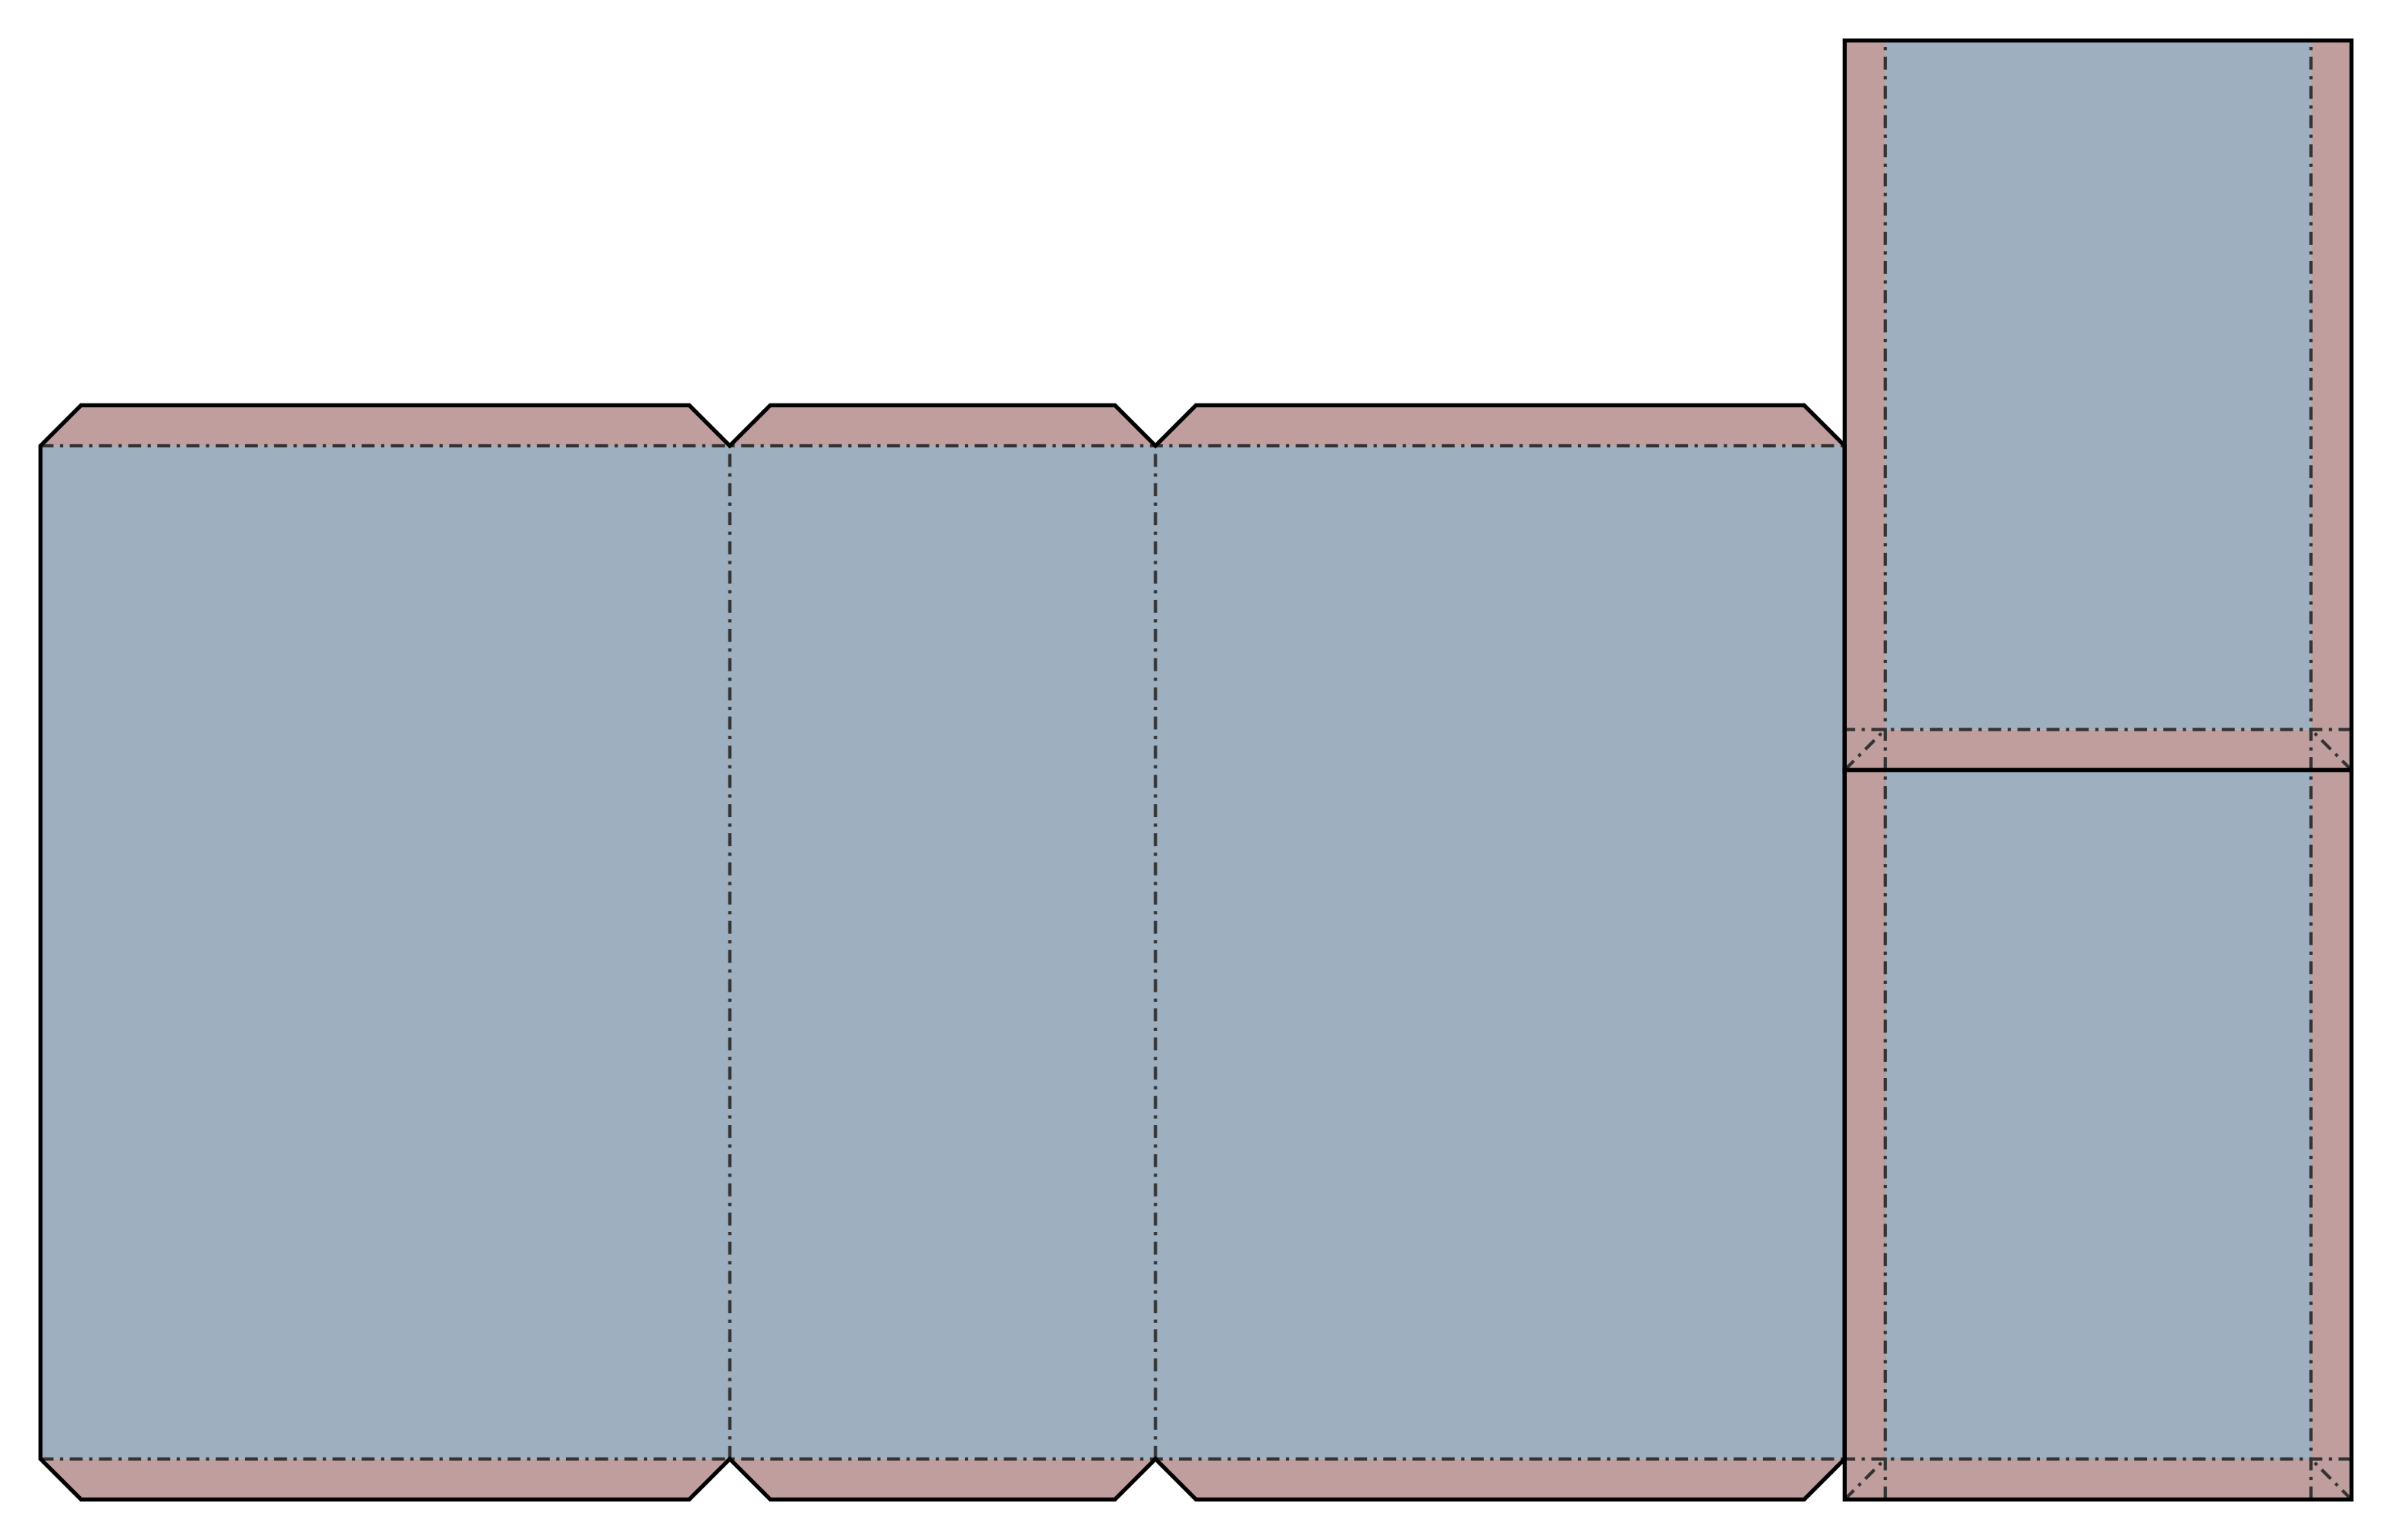 A cutting plan showing the shape of 3 rectangular panels, with one having glue tabs.